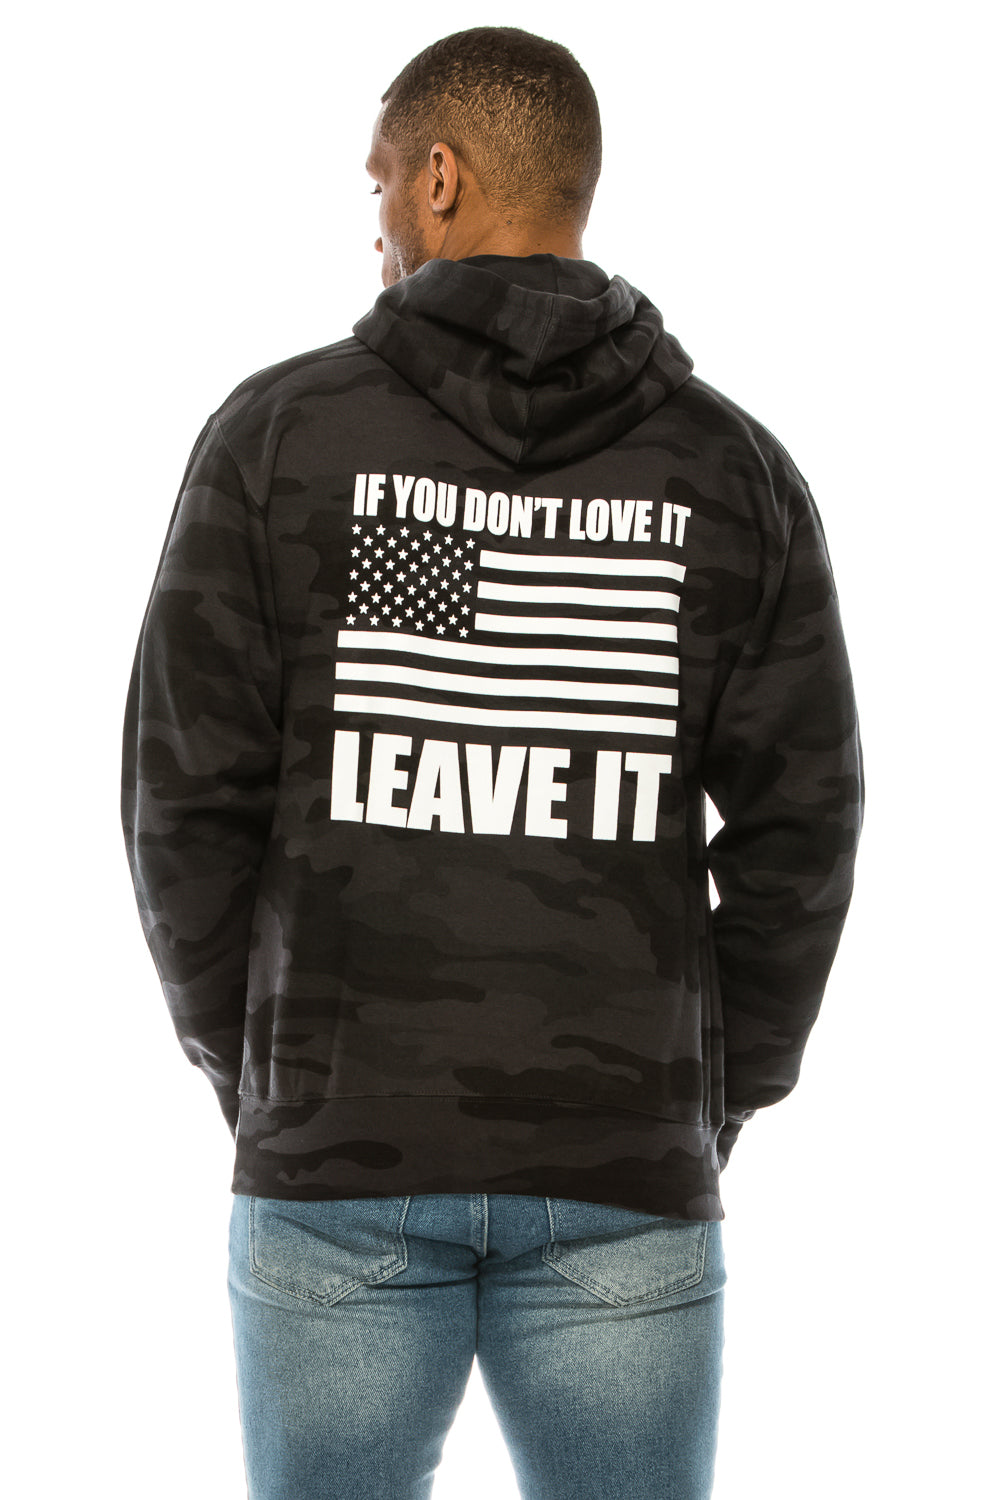 if you don't love it leave it camo hoodie